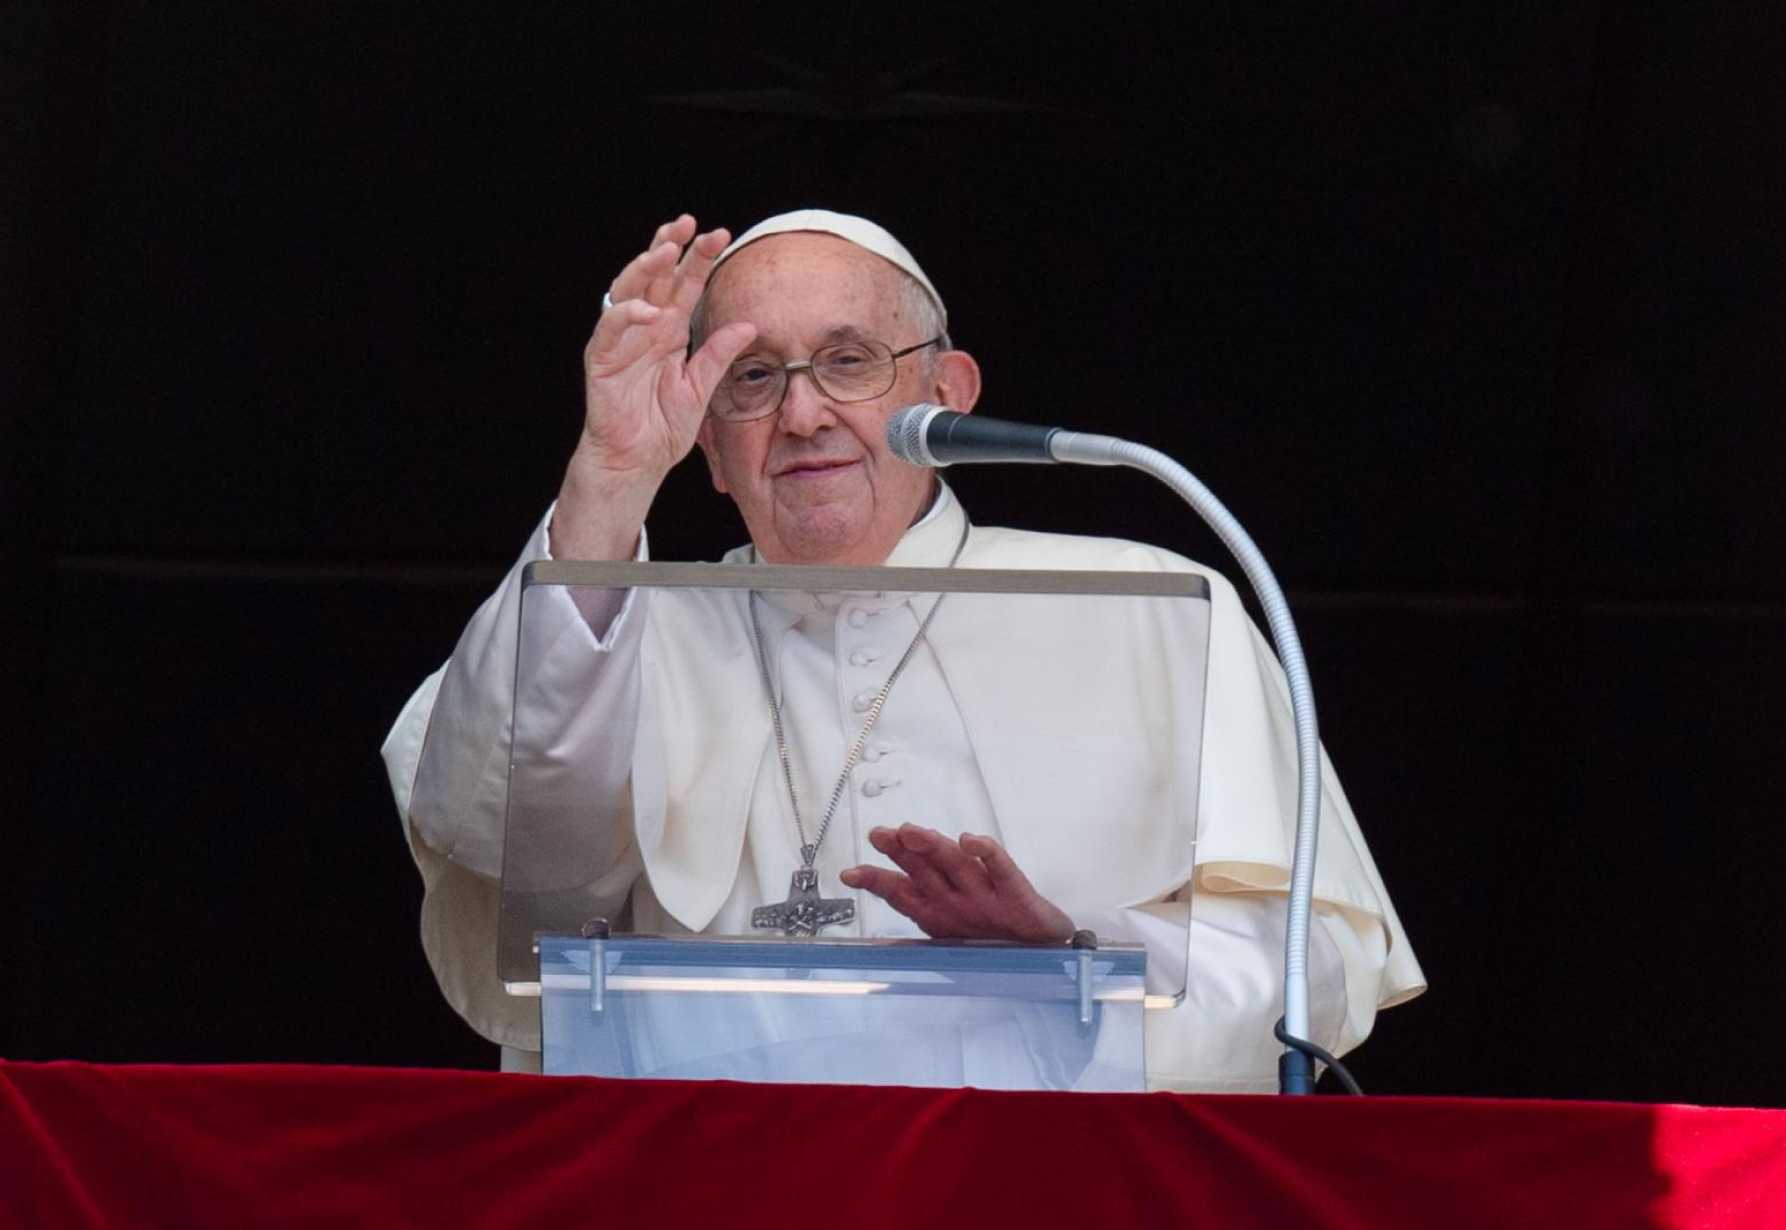 Remain faithful to what counts, no matter the cost, pope says